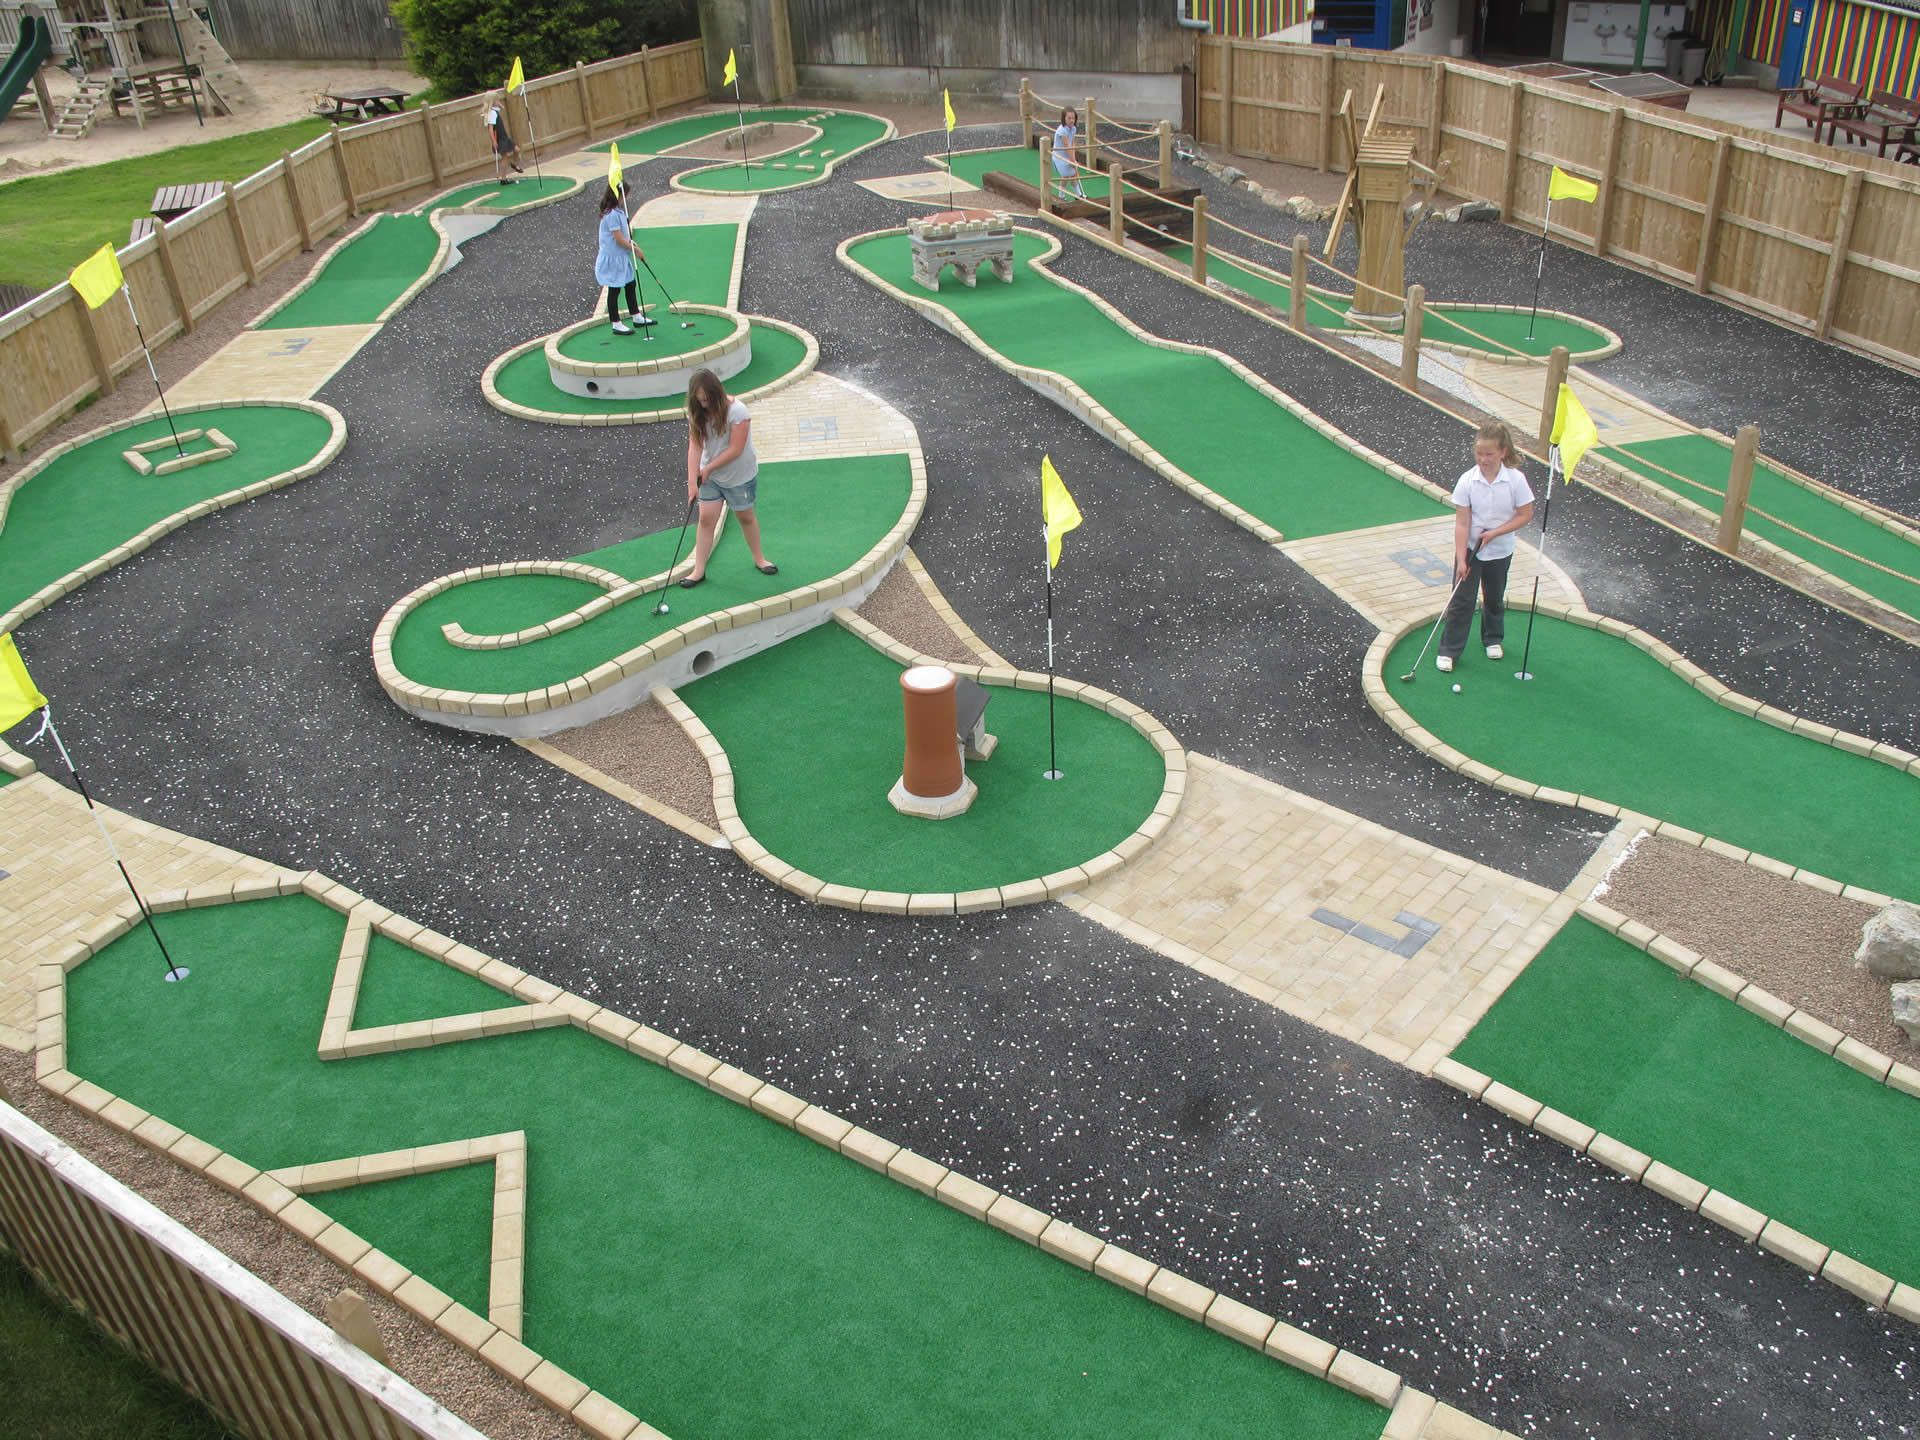 Backyard Miniature Golf Course Kits
 15 Game Room Ideas You Did Not Know About Pros & Cons